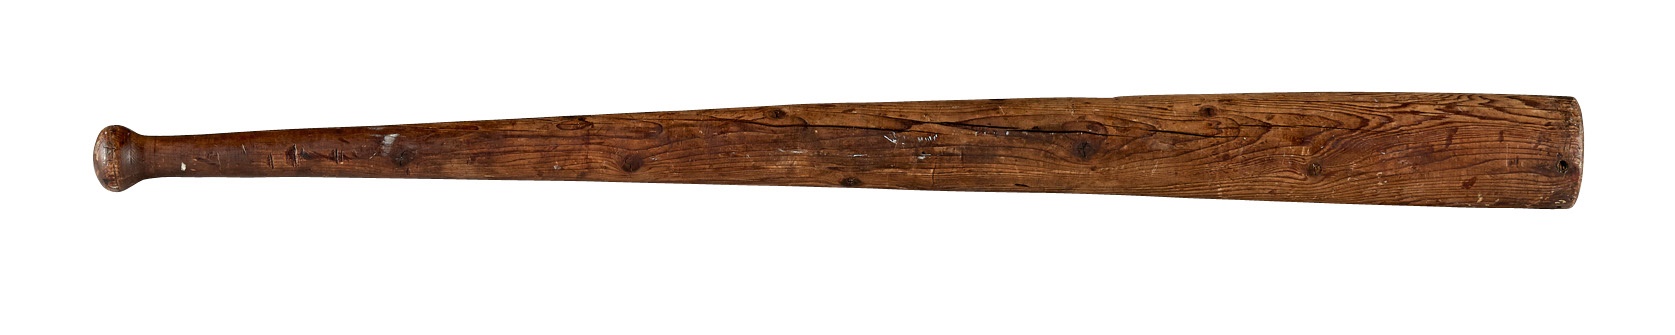 The Vern Foster Collection - 19th Century Baseball Trade Sign Bat (41 3/4")